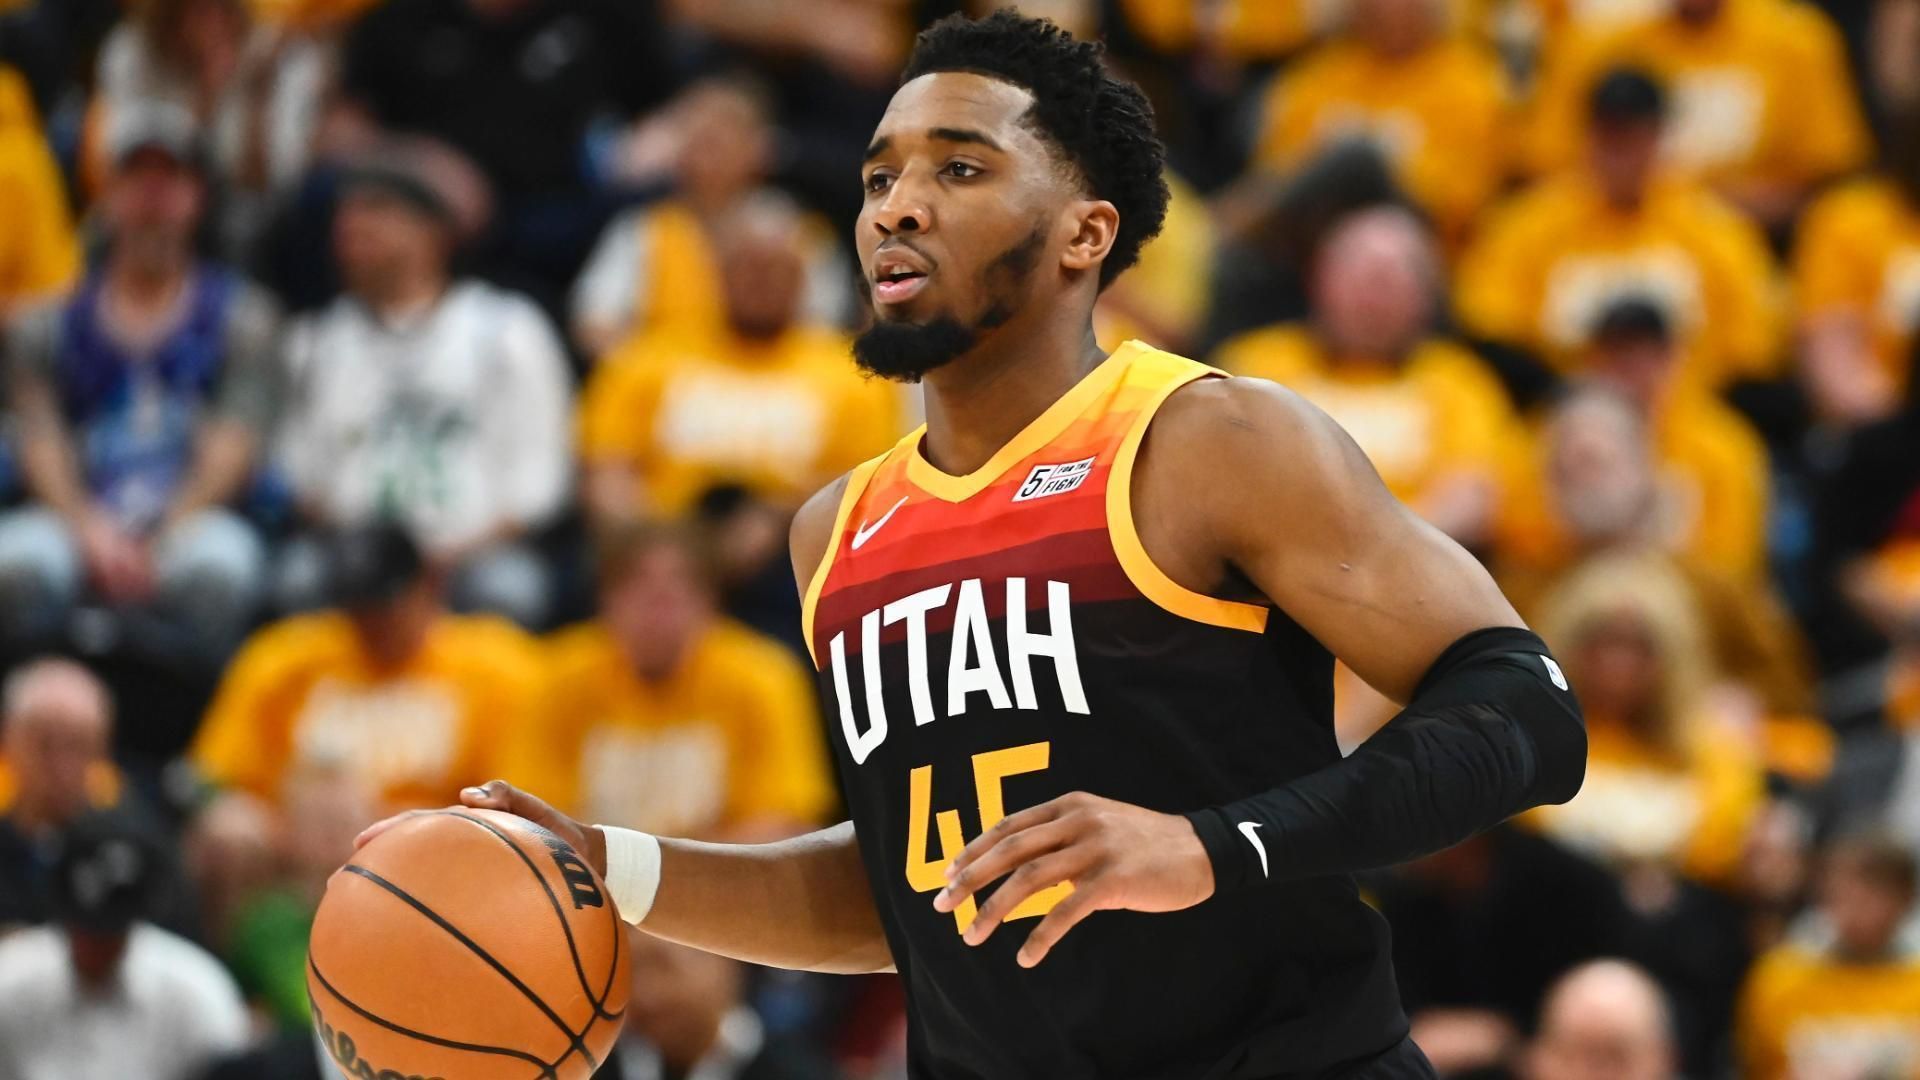 <div>'WHAT?!': Donovan Mitchell to the Cavs takes over NBA Twitter</div>